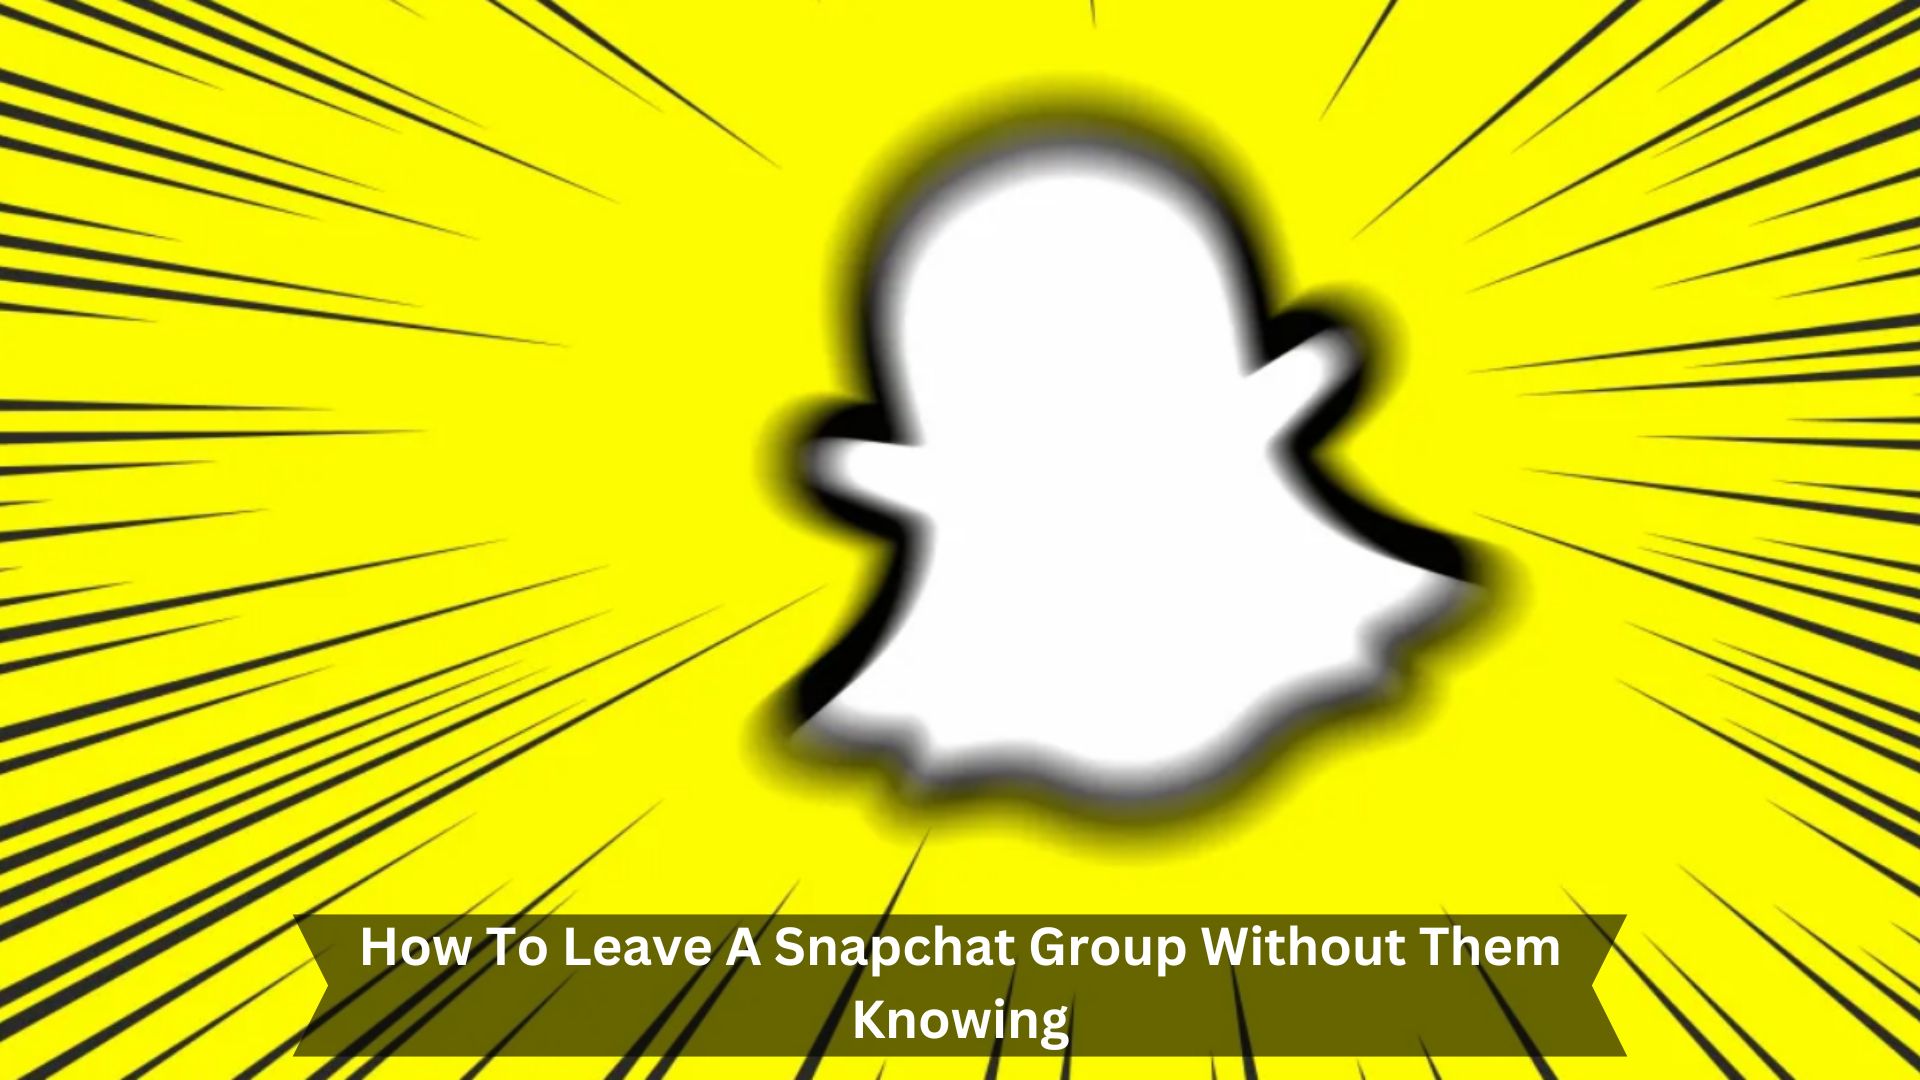 How-To-Leave-A-Snapchat-Group-Without-Them-Knowing